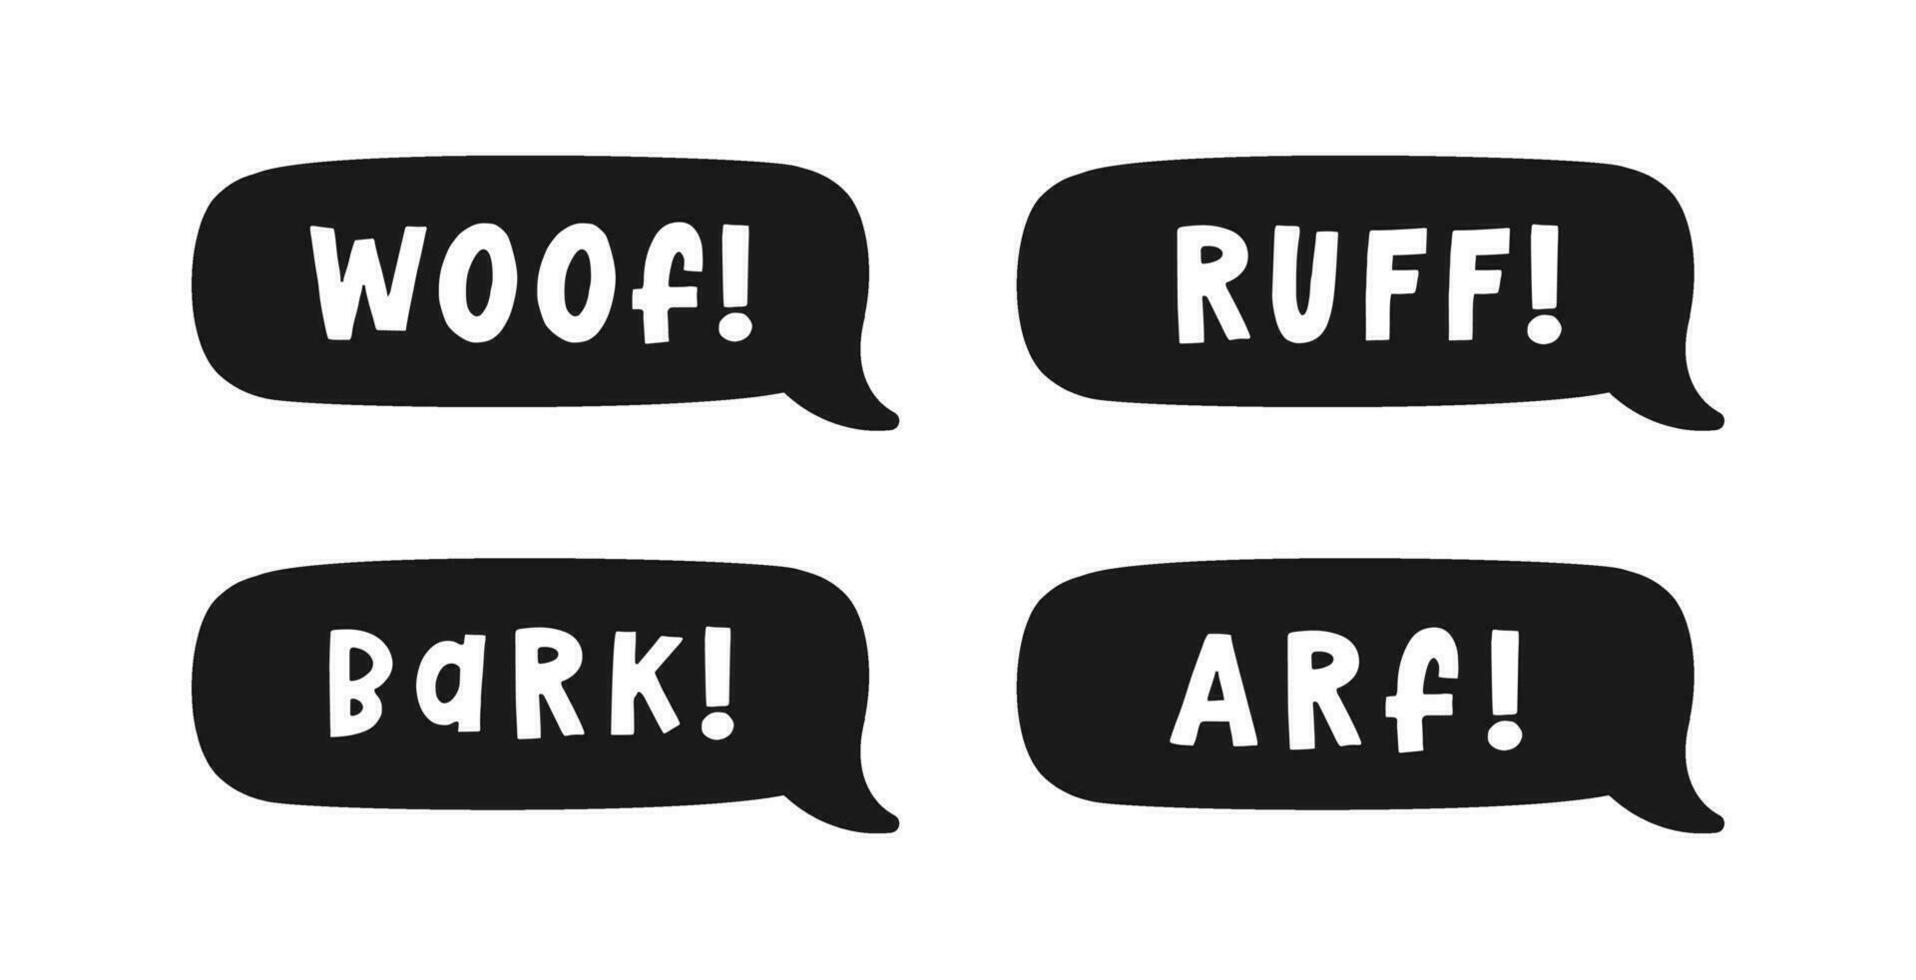 Dog bark animal sound effect text in a speech bubble balloon silhouette clipart set. Cute cartoon onomatopoeia comics and lettering. vector